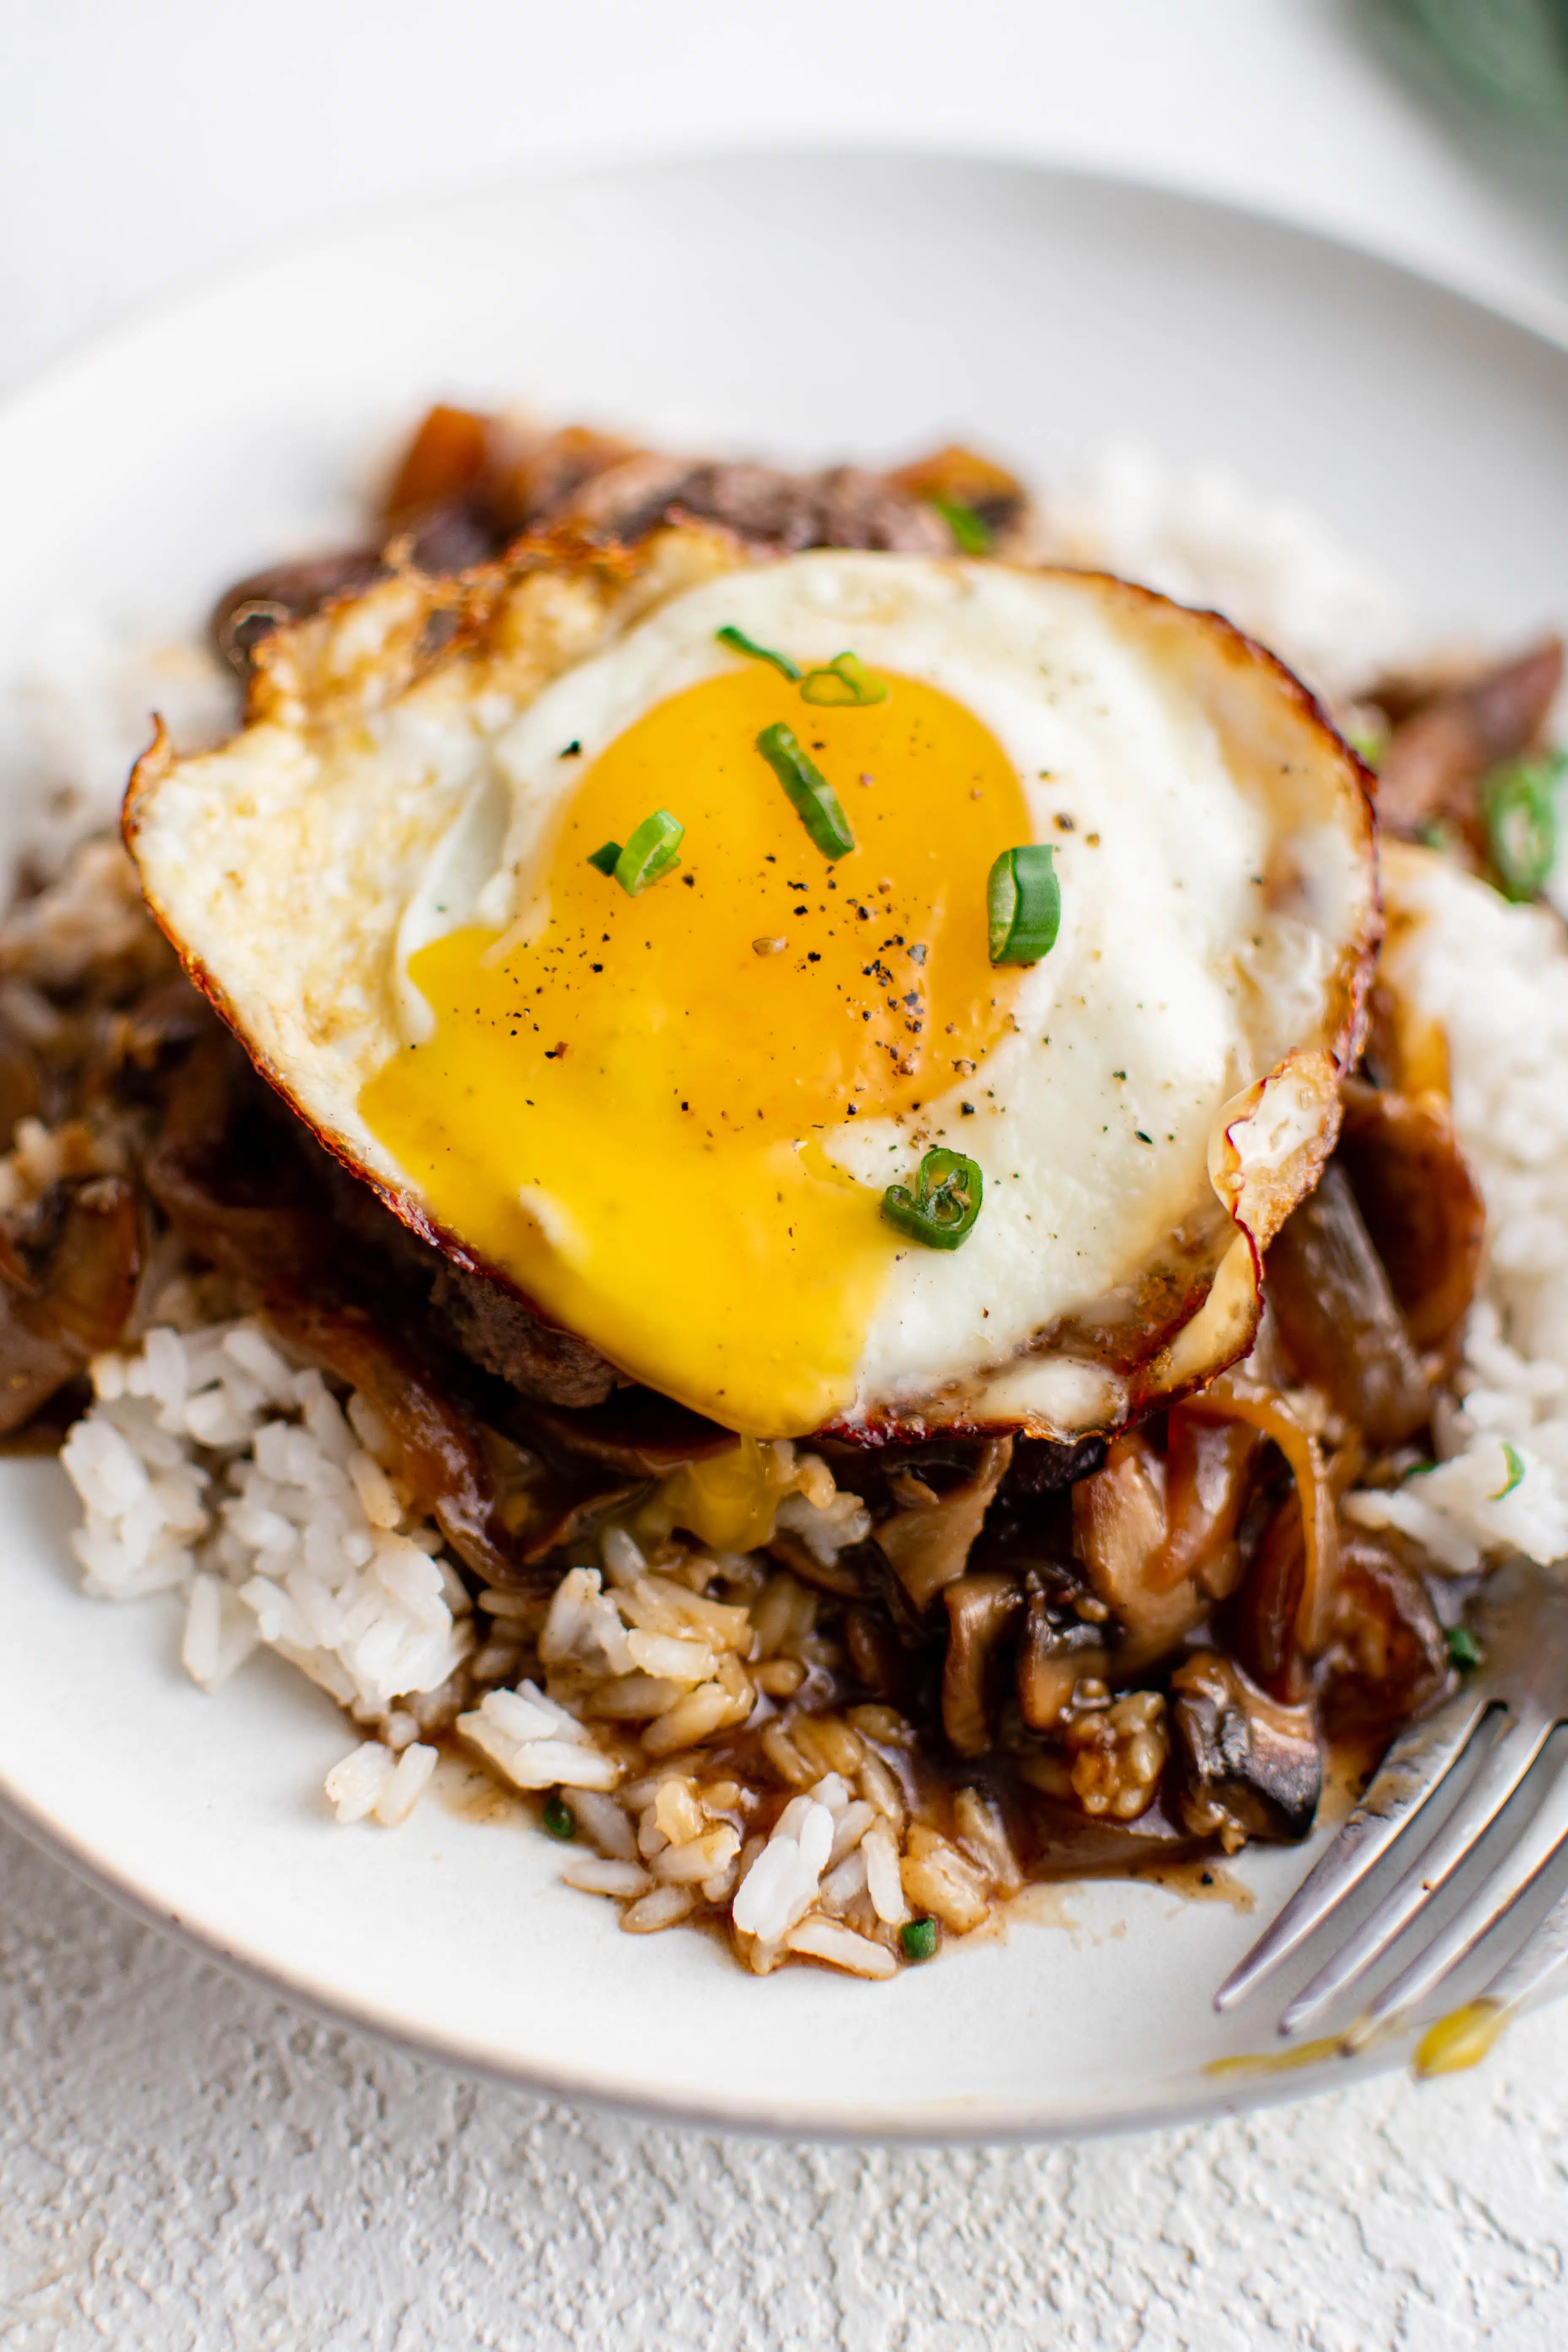 White plate filled with fluffy white rice smothered in an onion and mushroom gravy and topped with a hamburger patty and runny fried egg and garnished with sliced green onion.